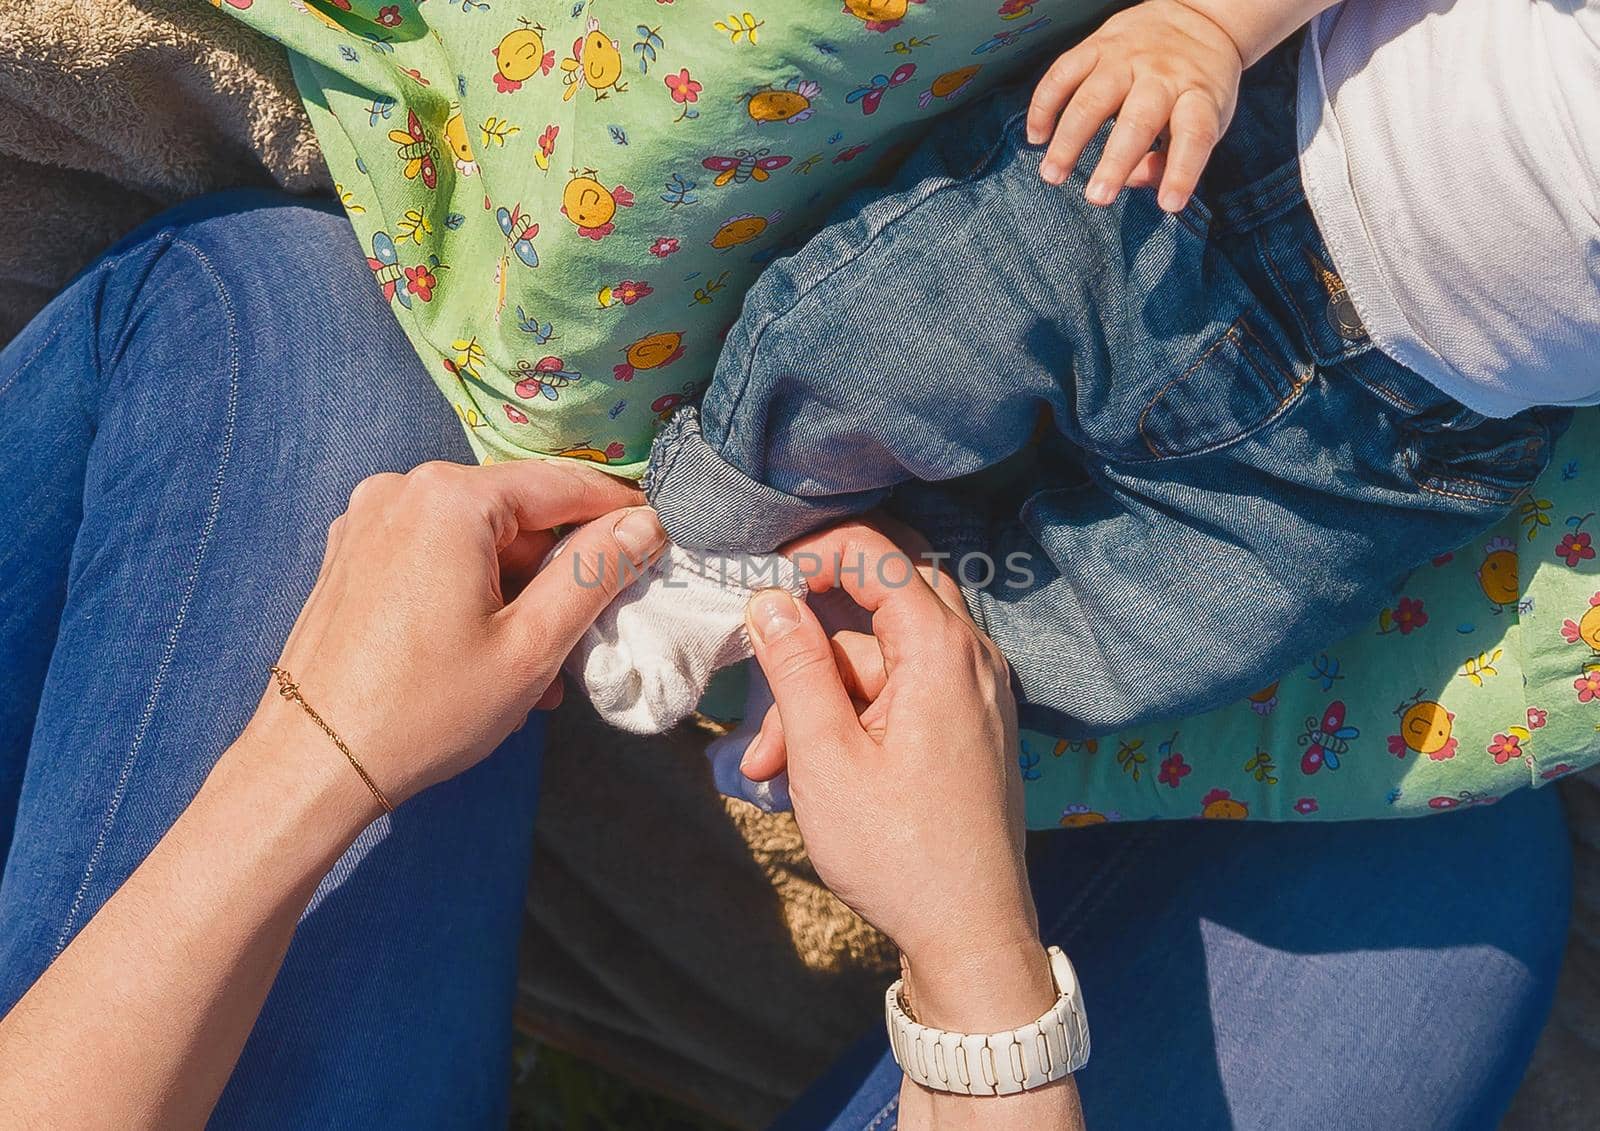 Mom's hands put on socks on the baby's feet, close up by AYDO8